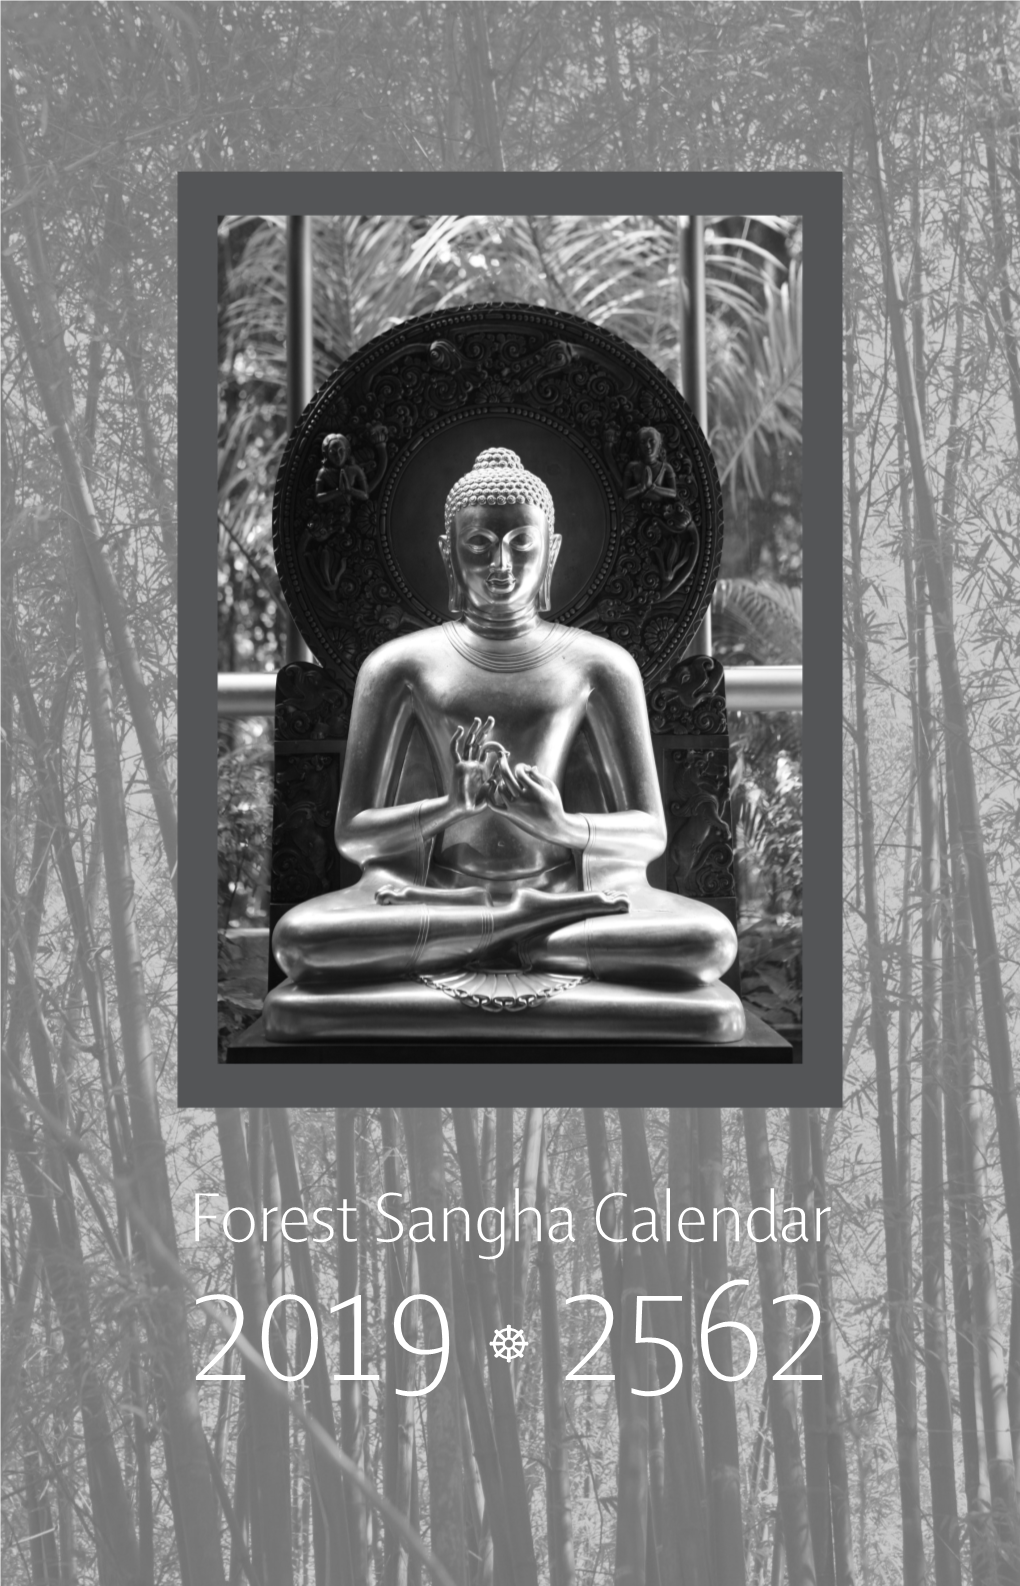 Forest Sangha Calendar 2019 ☸ 2562 This 2019 Calendar Has Been Sponsored for Free Distribution by the Kataññutā Group of Malaysia, Singapore and Australia